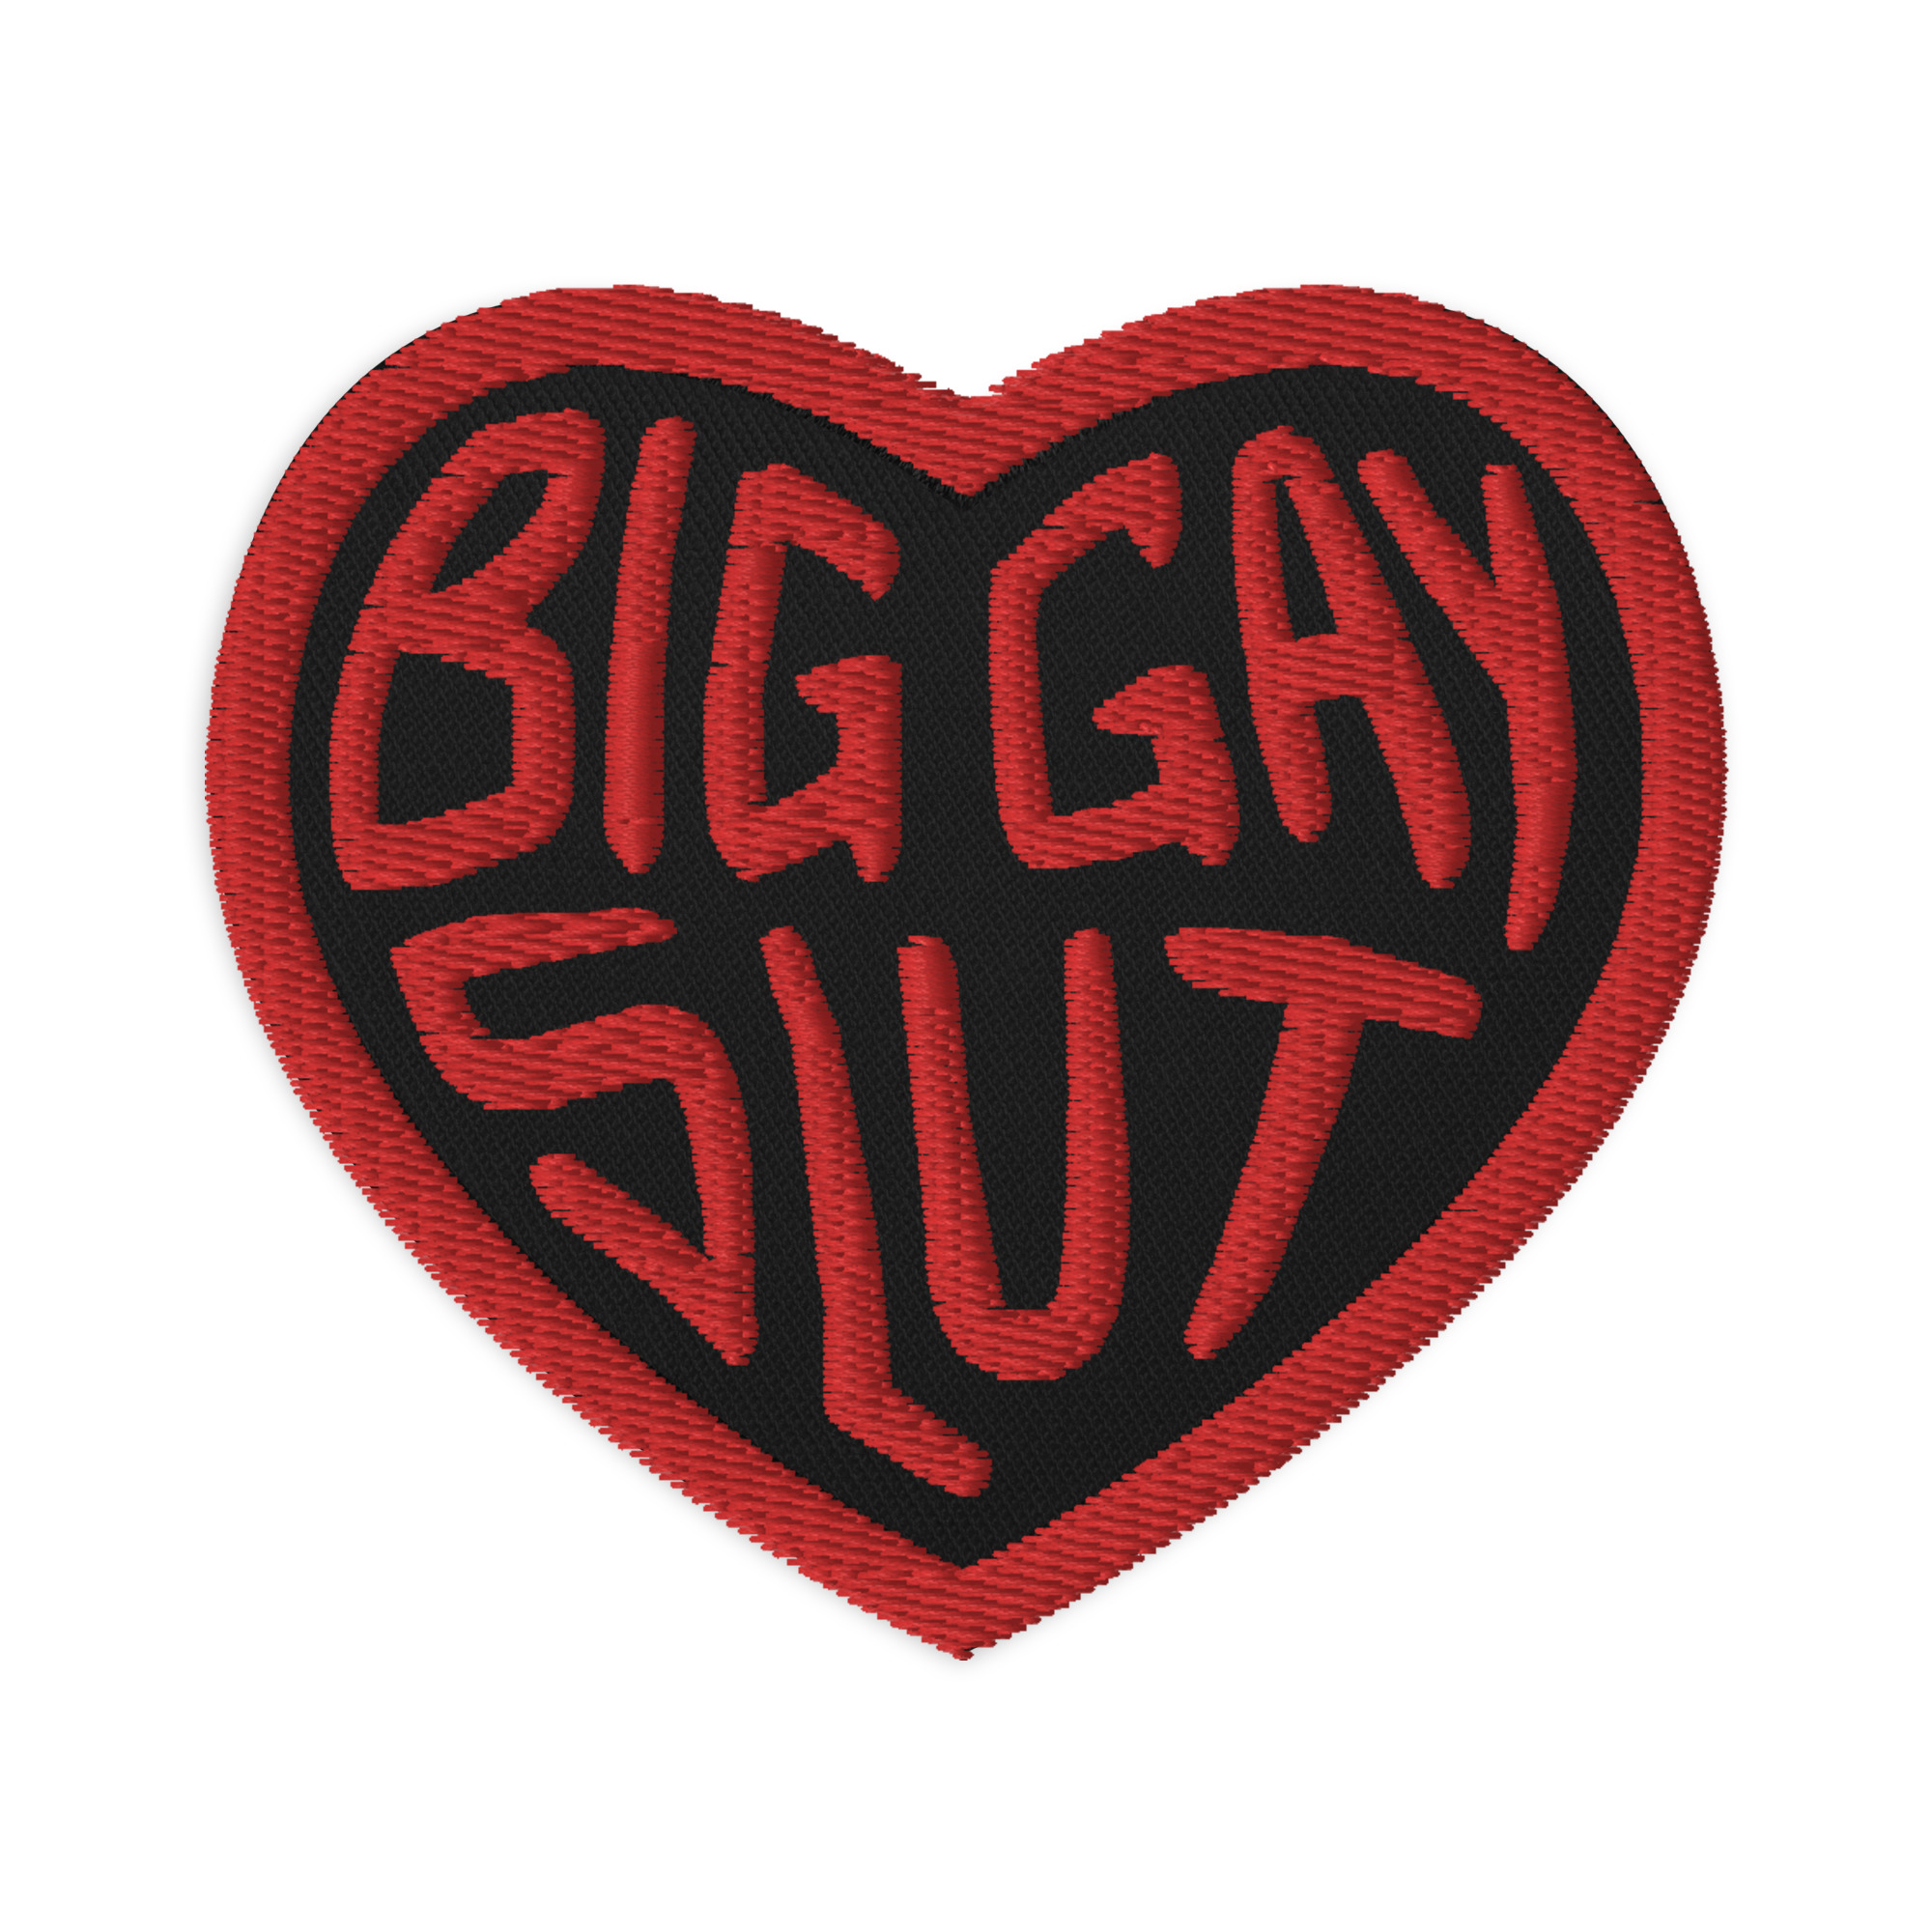 Featured image for “BIG GAY SL%T - Embroidered patches”